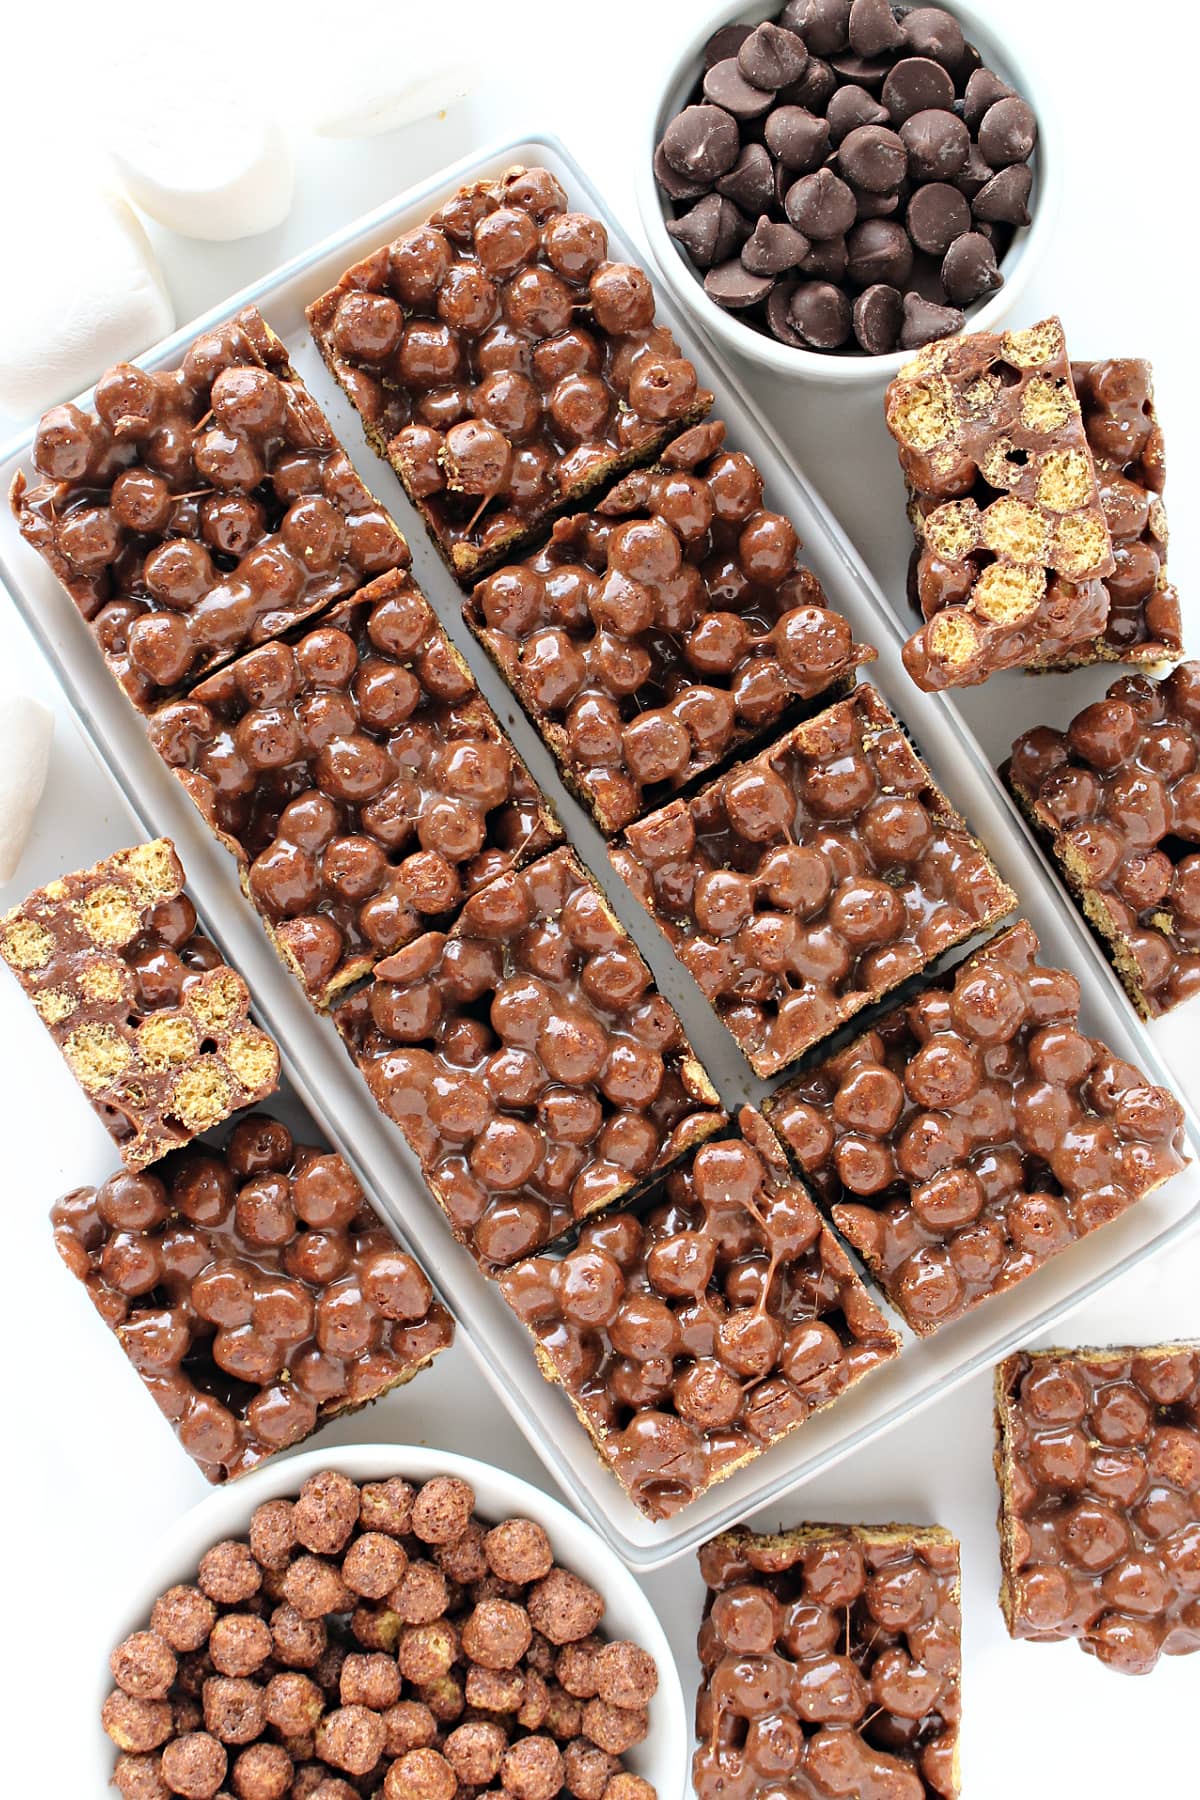 Shiny squares of Cocoa Puff bars on a serving platter.